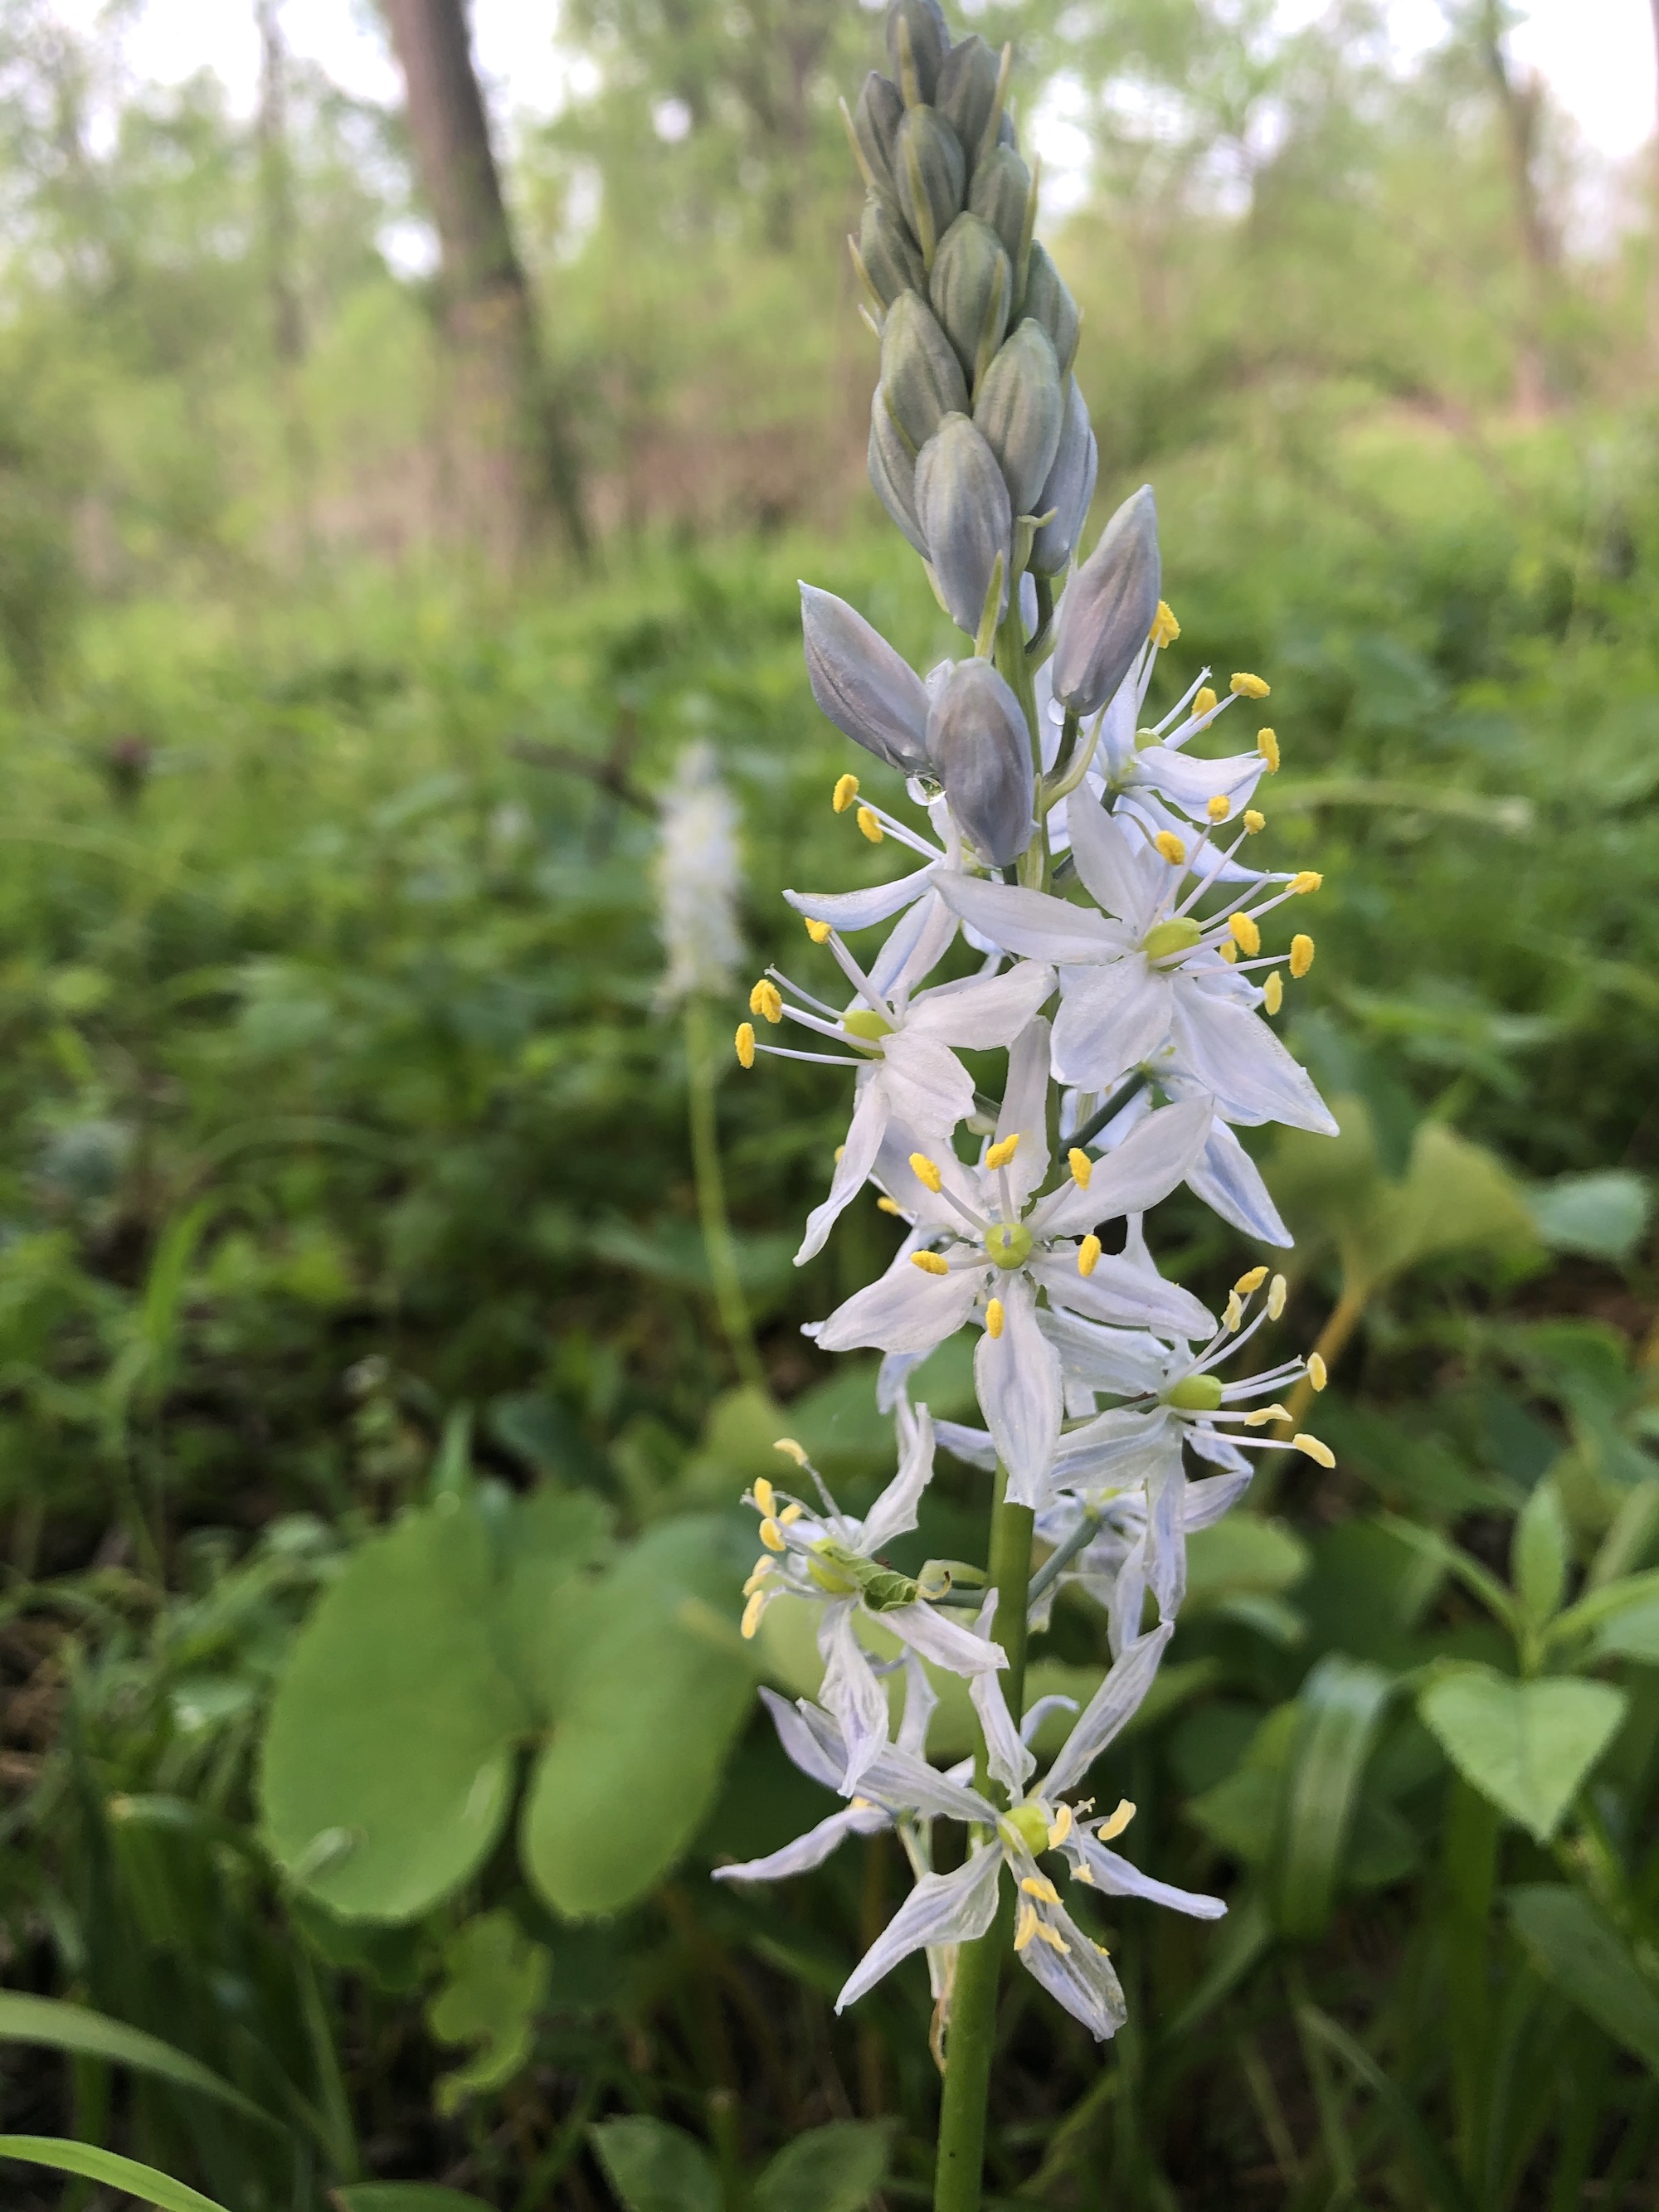 Wild Hyacinth by Council Ring on May 20, 2020.